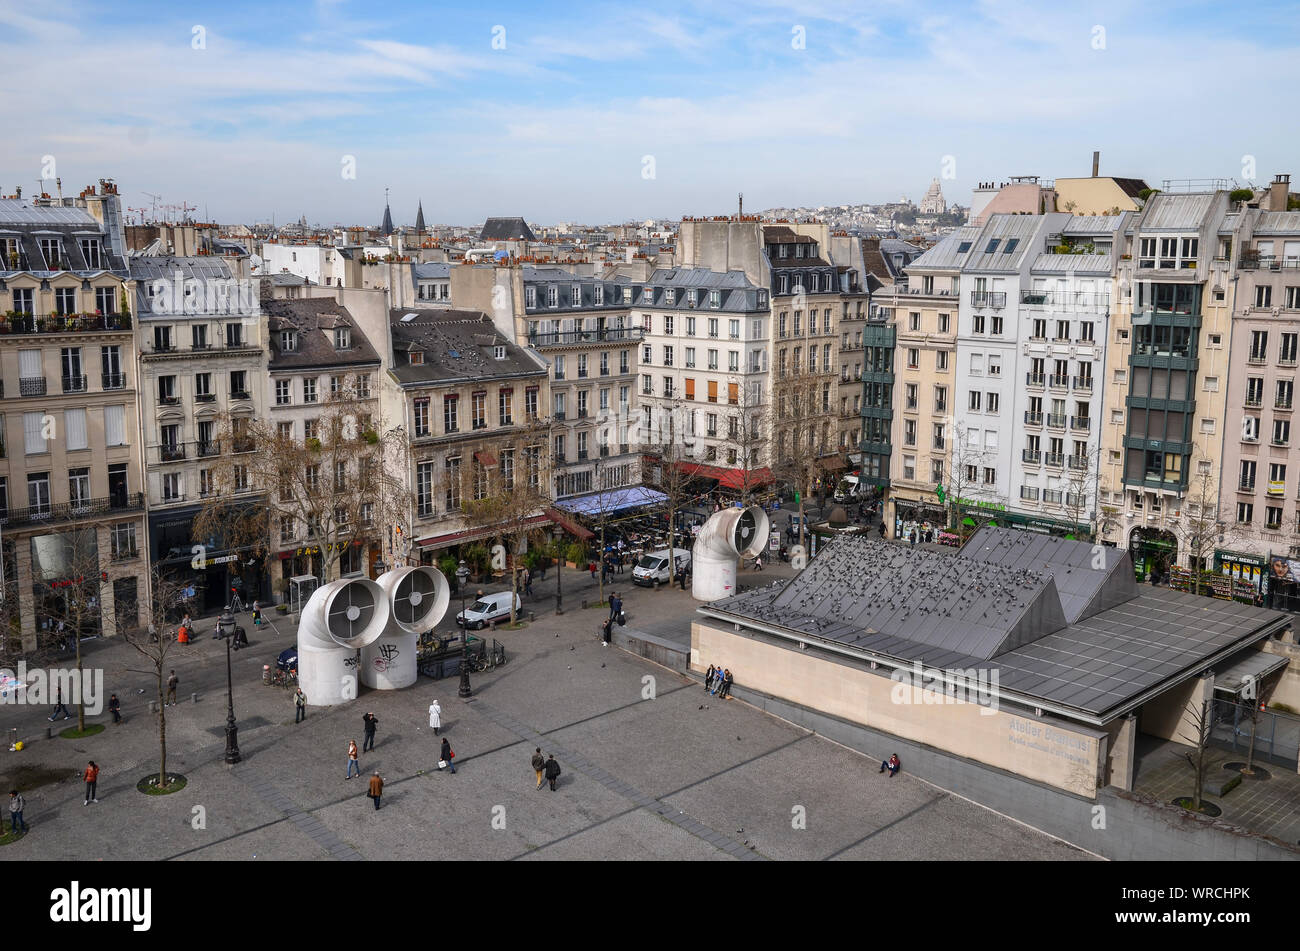 PARIS, FRANCE - MARCH 19, 2014: stunning view of Paris (Sacré-Cœur Basilica in the background) taken from the Pompidou Centre in the Beaubourg area. Stock Photo